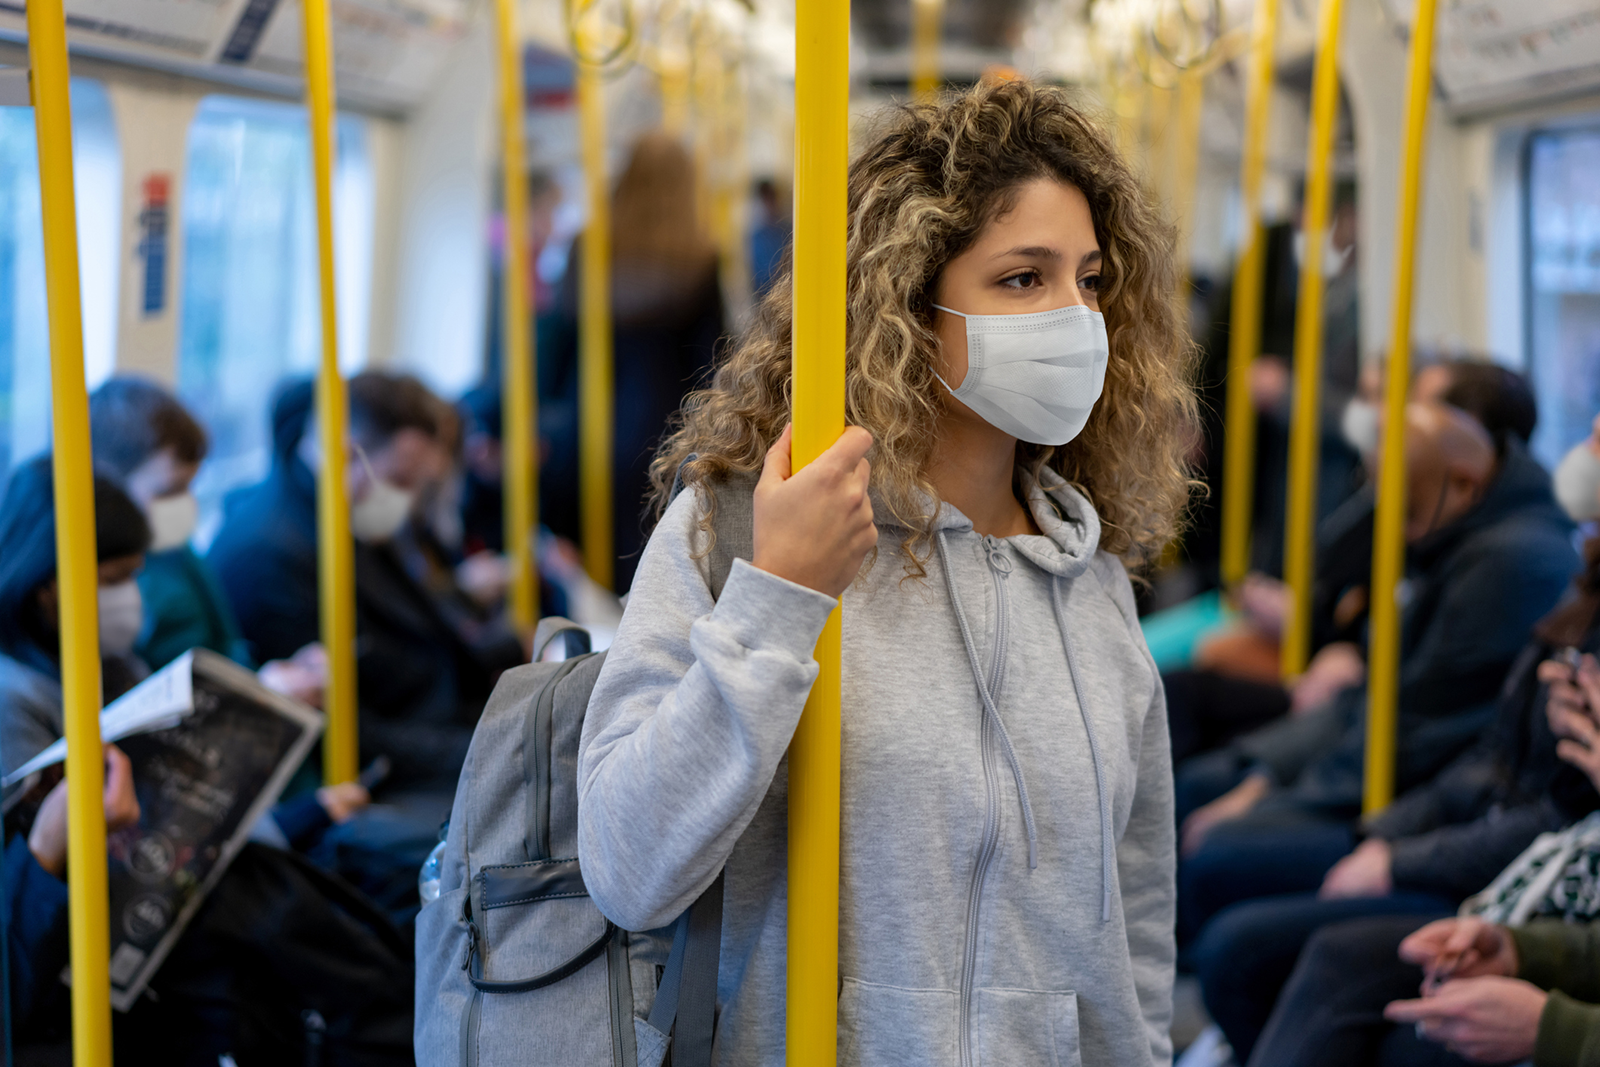 Young woman with curly hair wearing gray sweatshirt, backpack, and surgical face mask, stands on a crowded subway train holding on to a vertical yellow bar